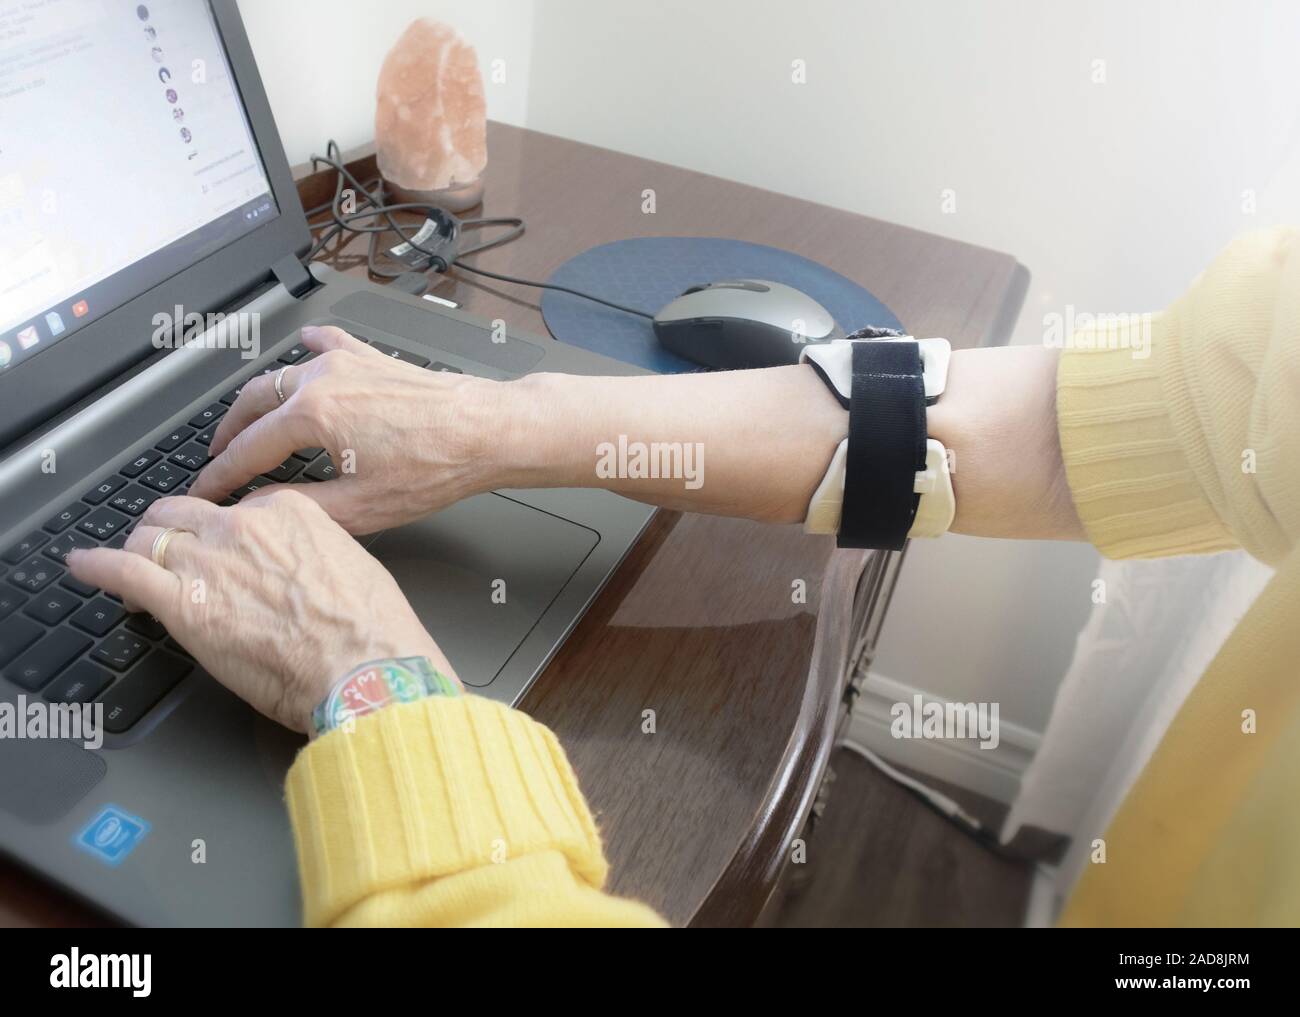 The hands of a mature woman working on a laptop. She wears a forearm band. Stock Photo